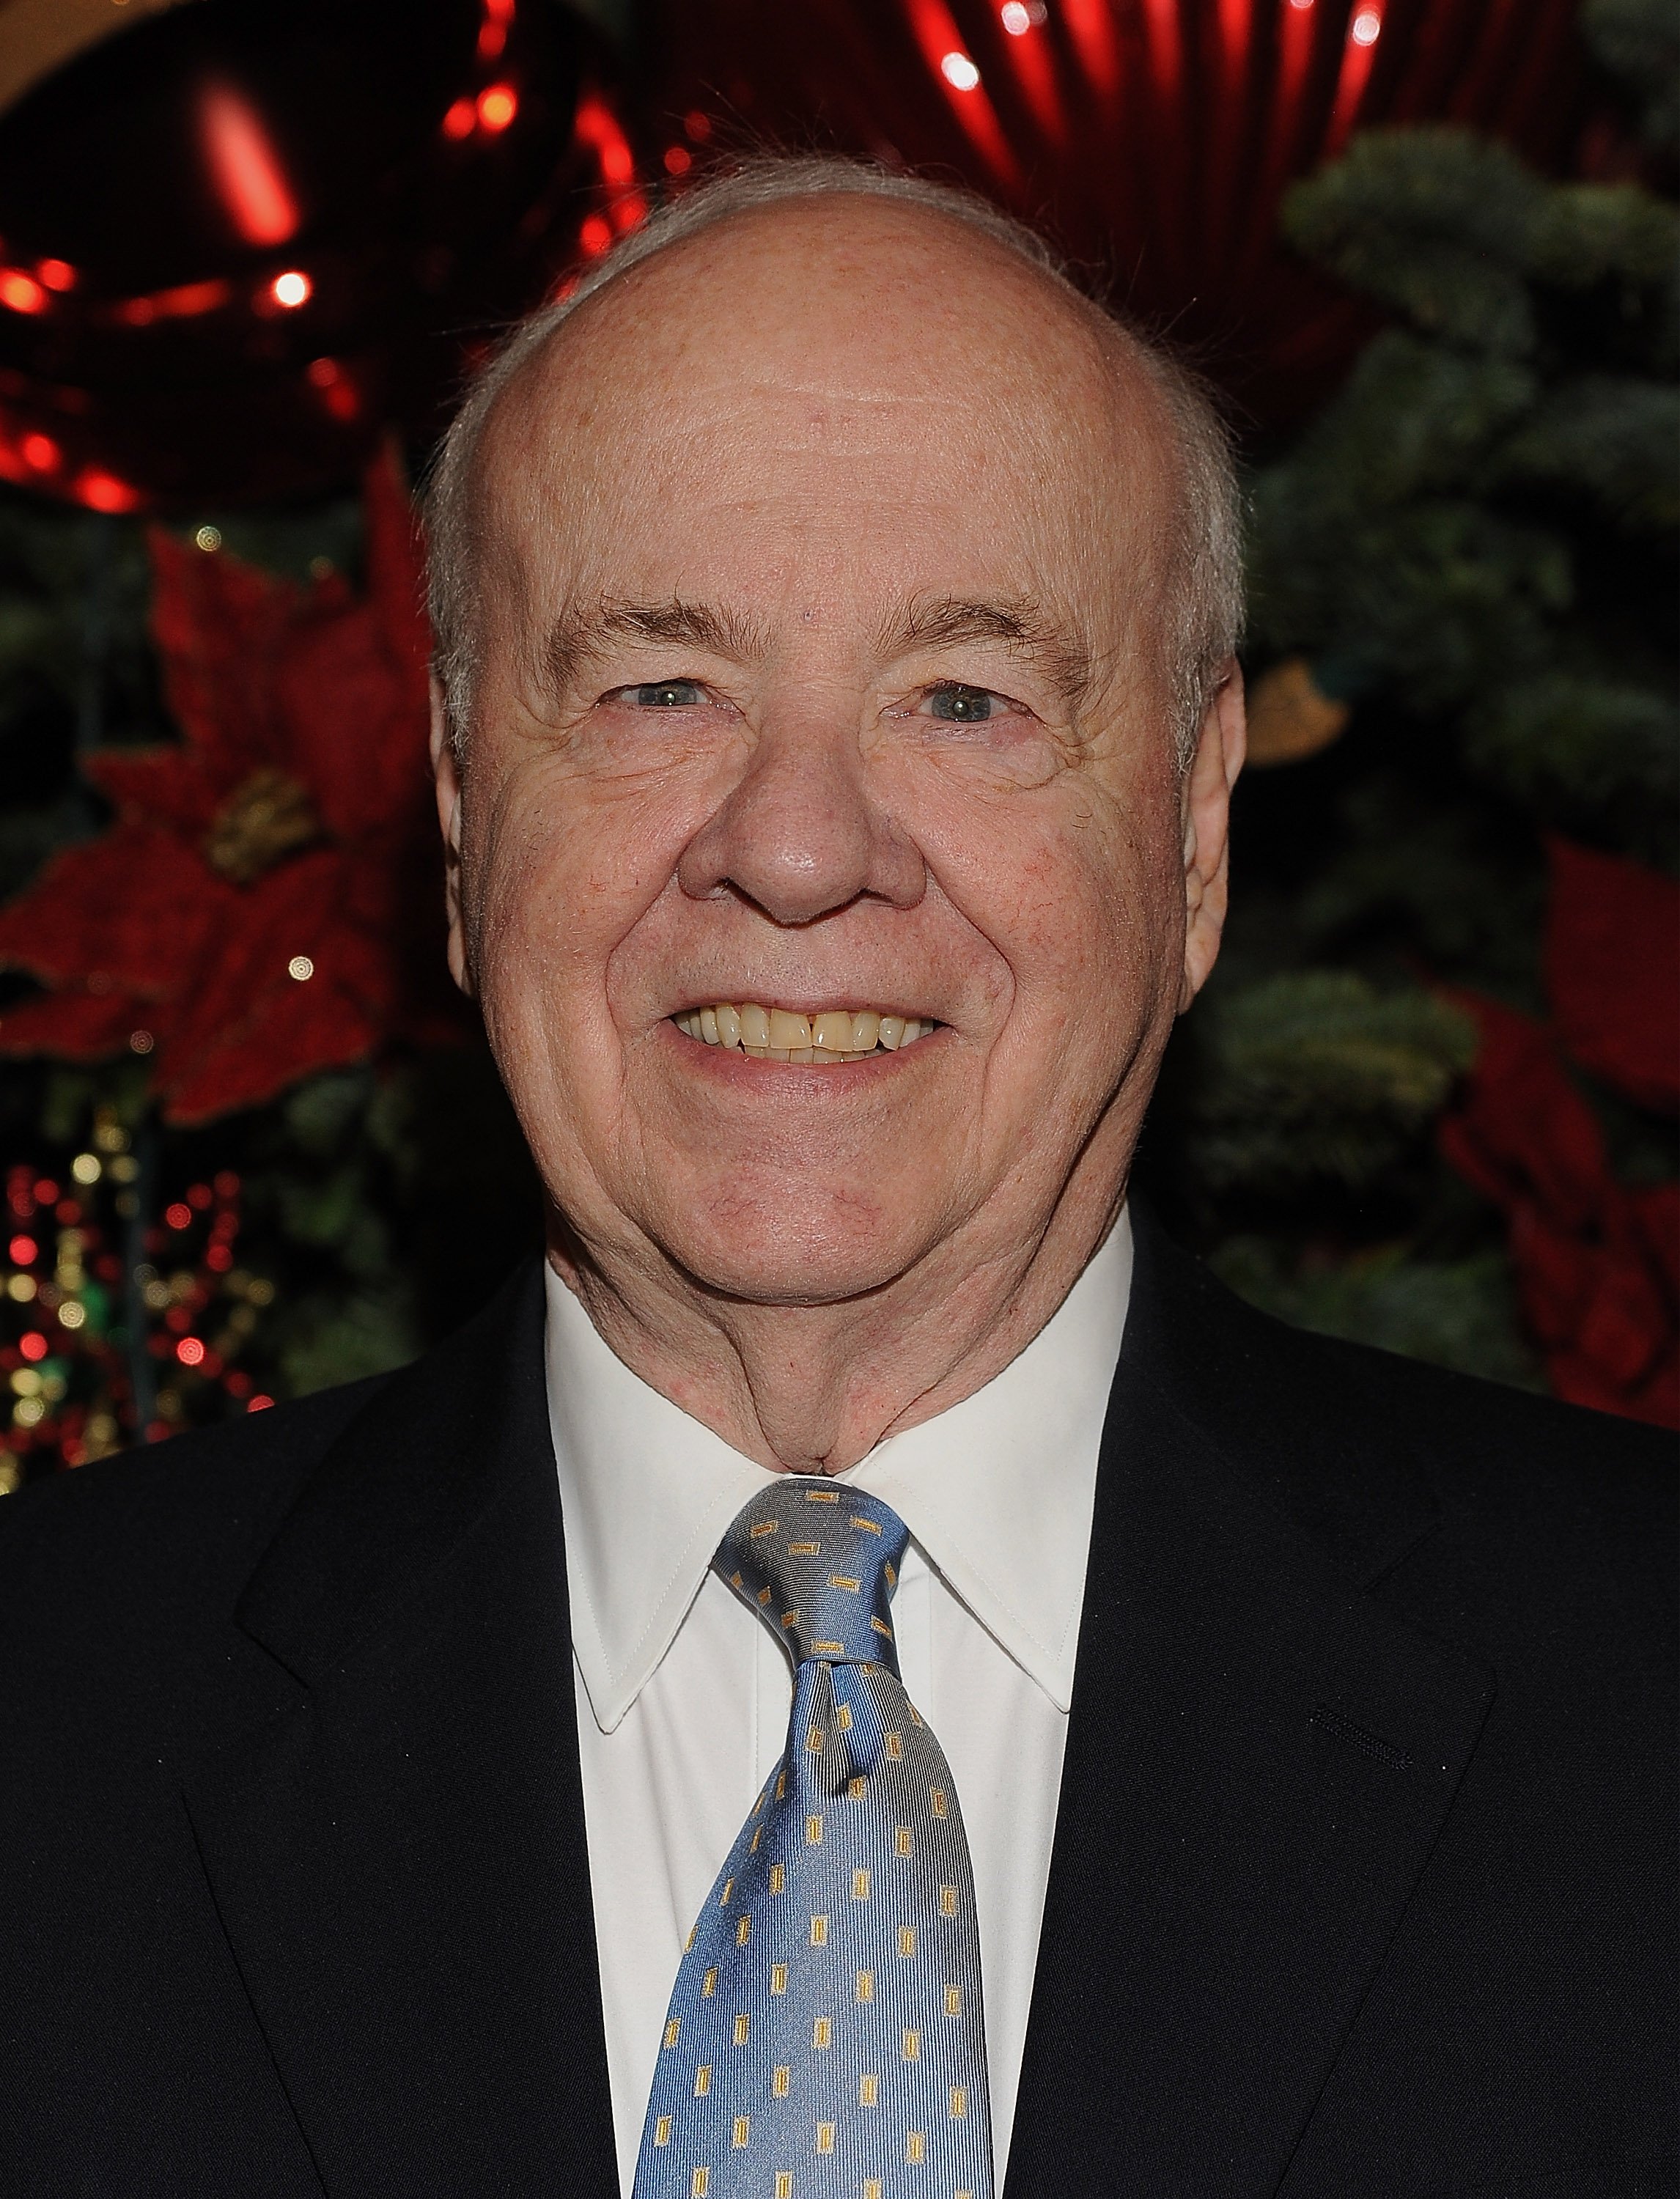 Tim Conway pictured signing copies of his new book "What's So Funny?" 2013, Beverly Hills, California. | Photo: Getty Images